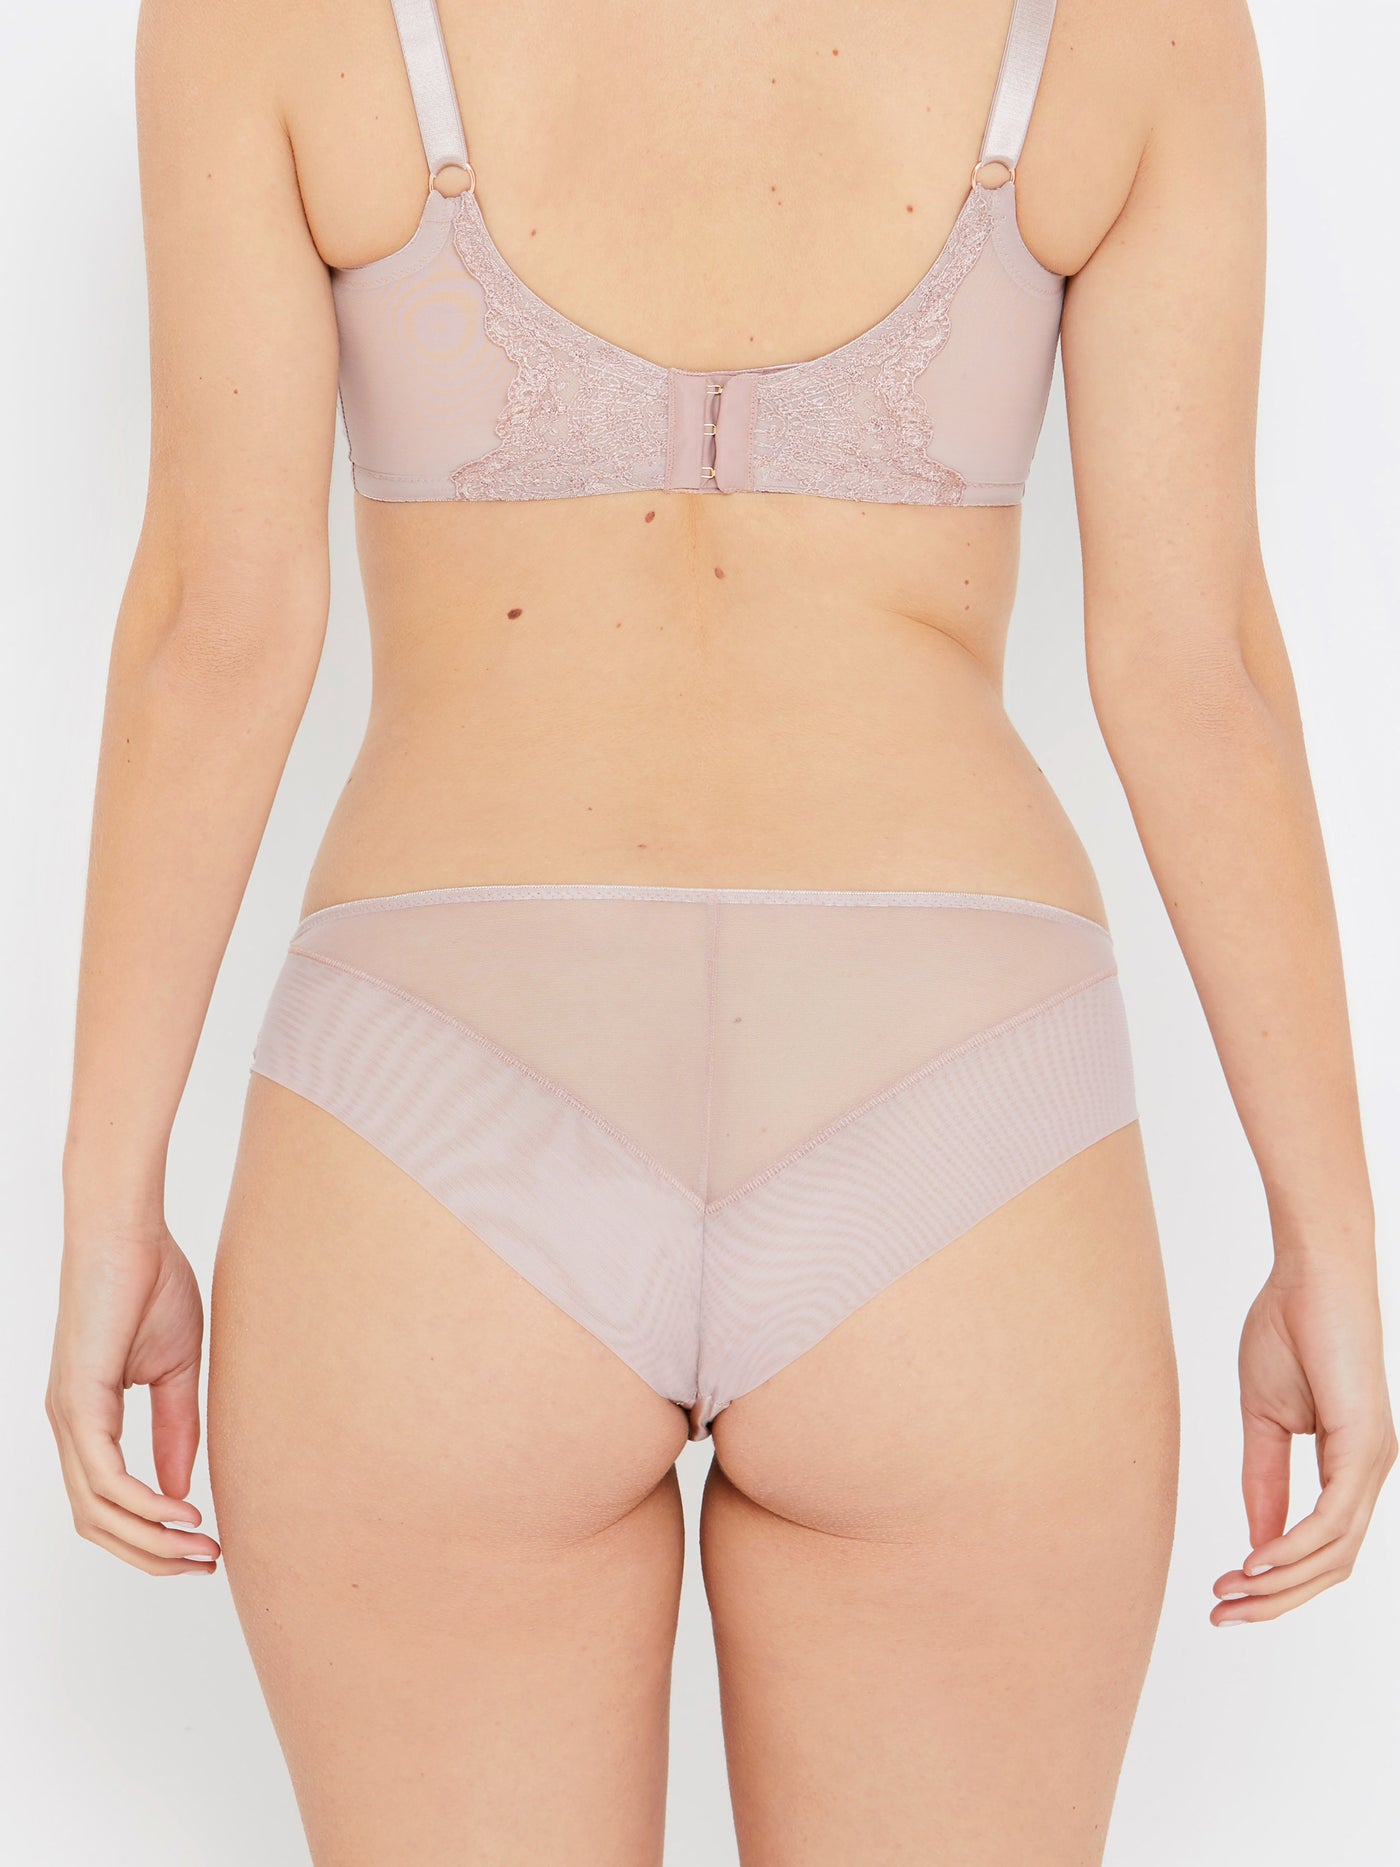 Grace vintage rose lace knickers back view